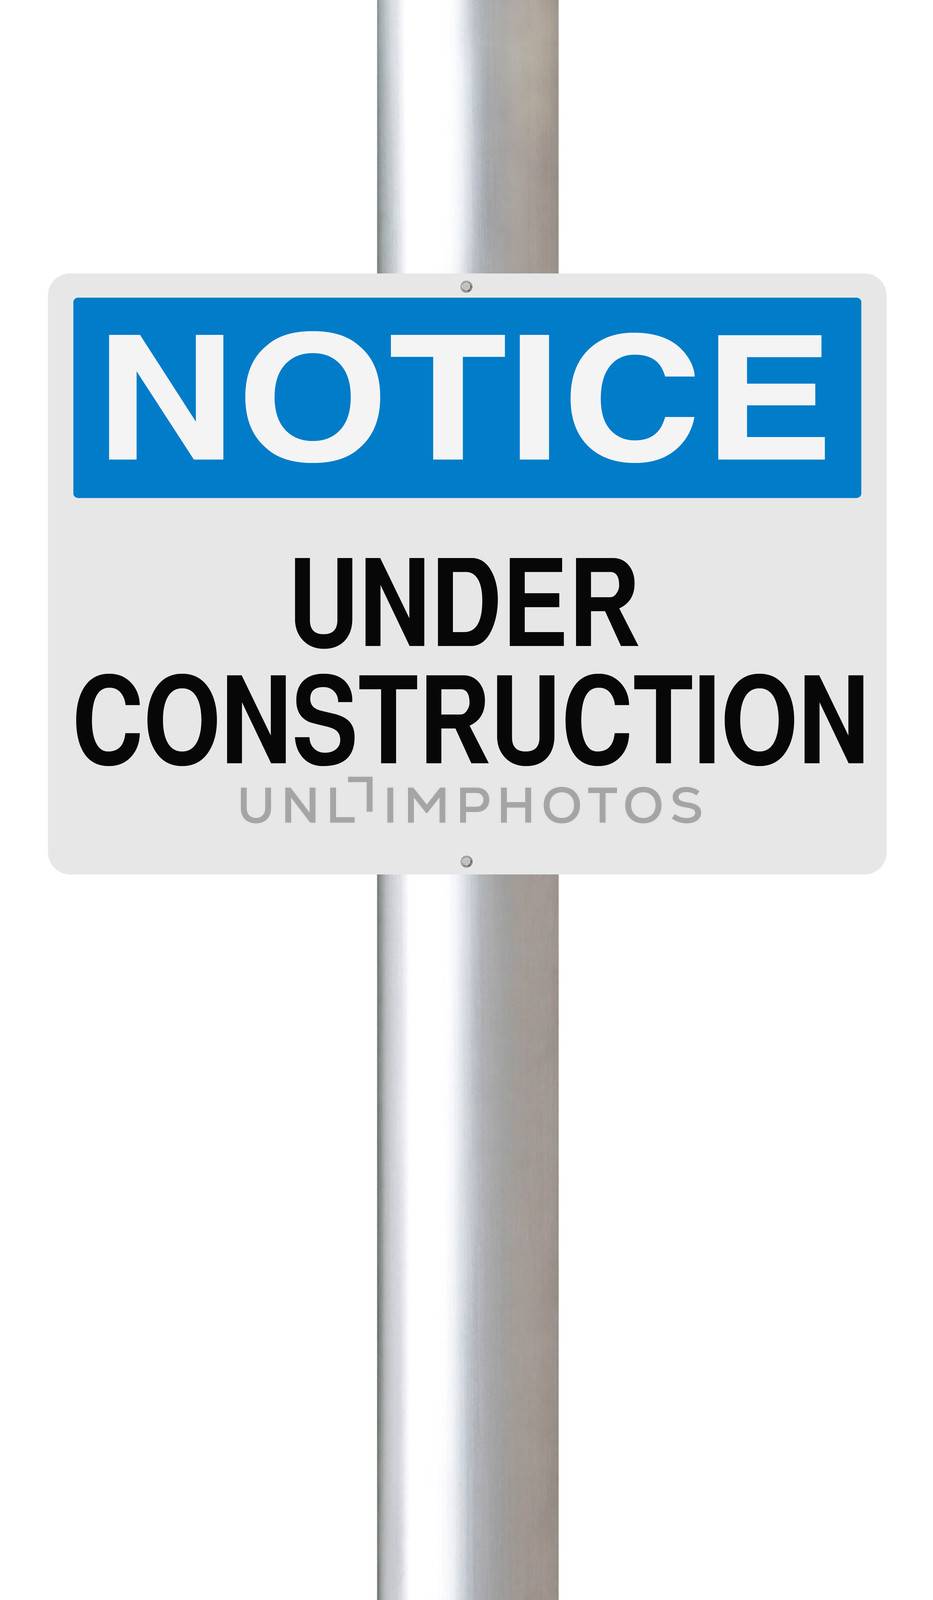 A notice sign indicating Under Construction